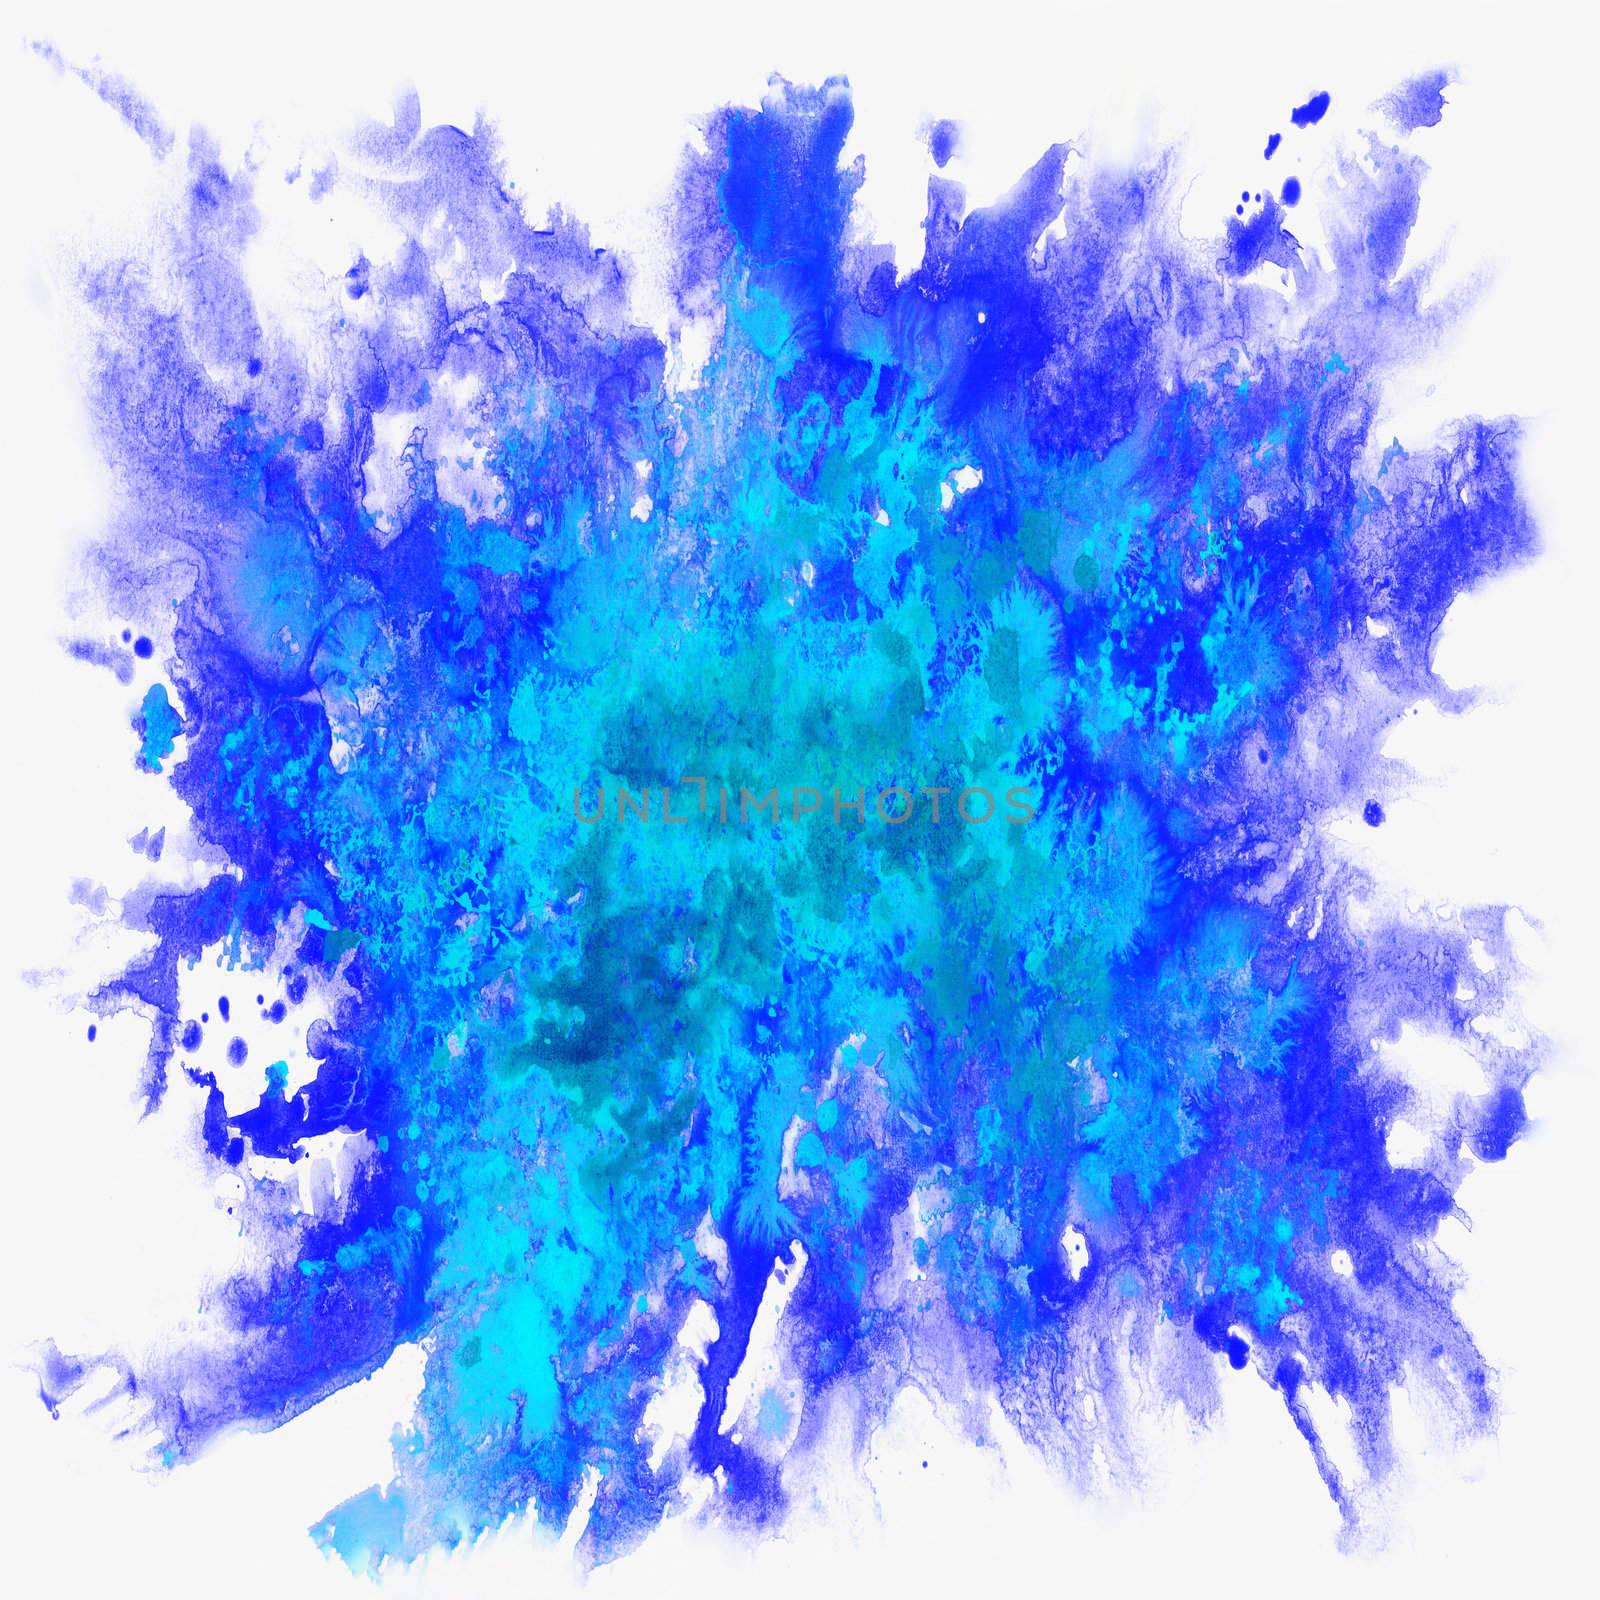 Abstract background, watercolor, hand painted on a paper. Blue, violet, white